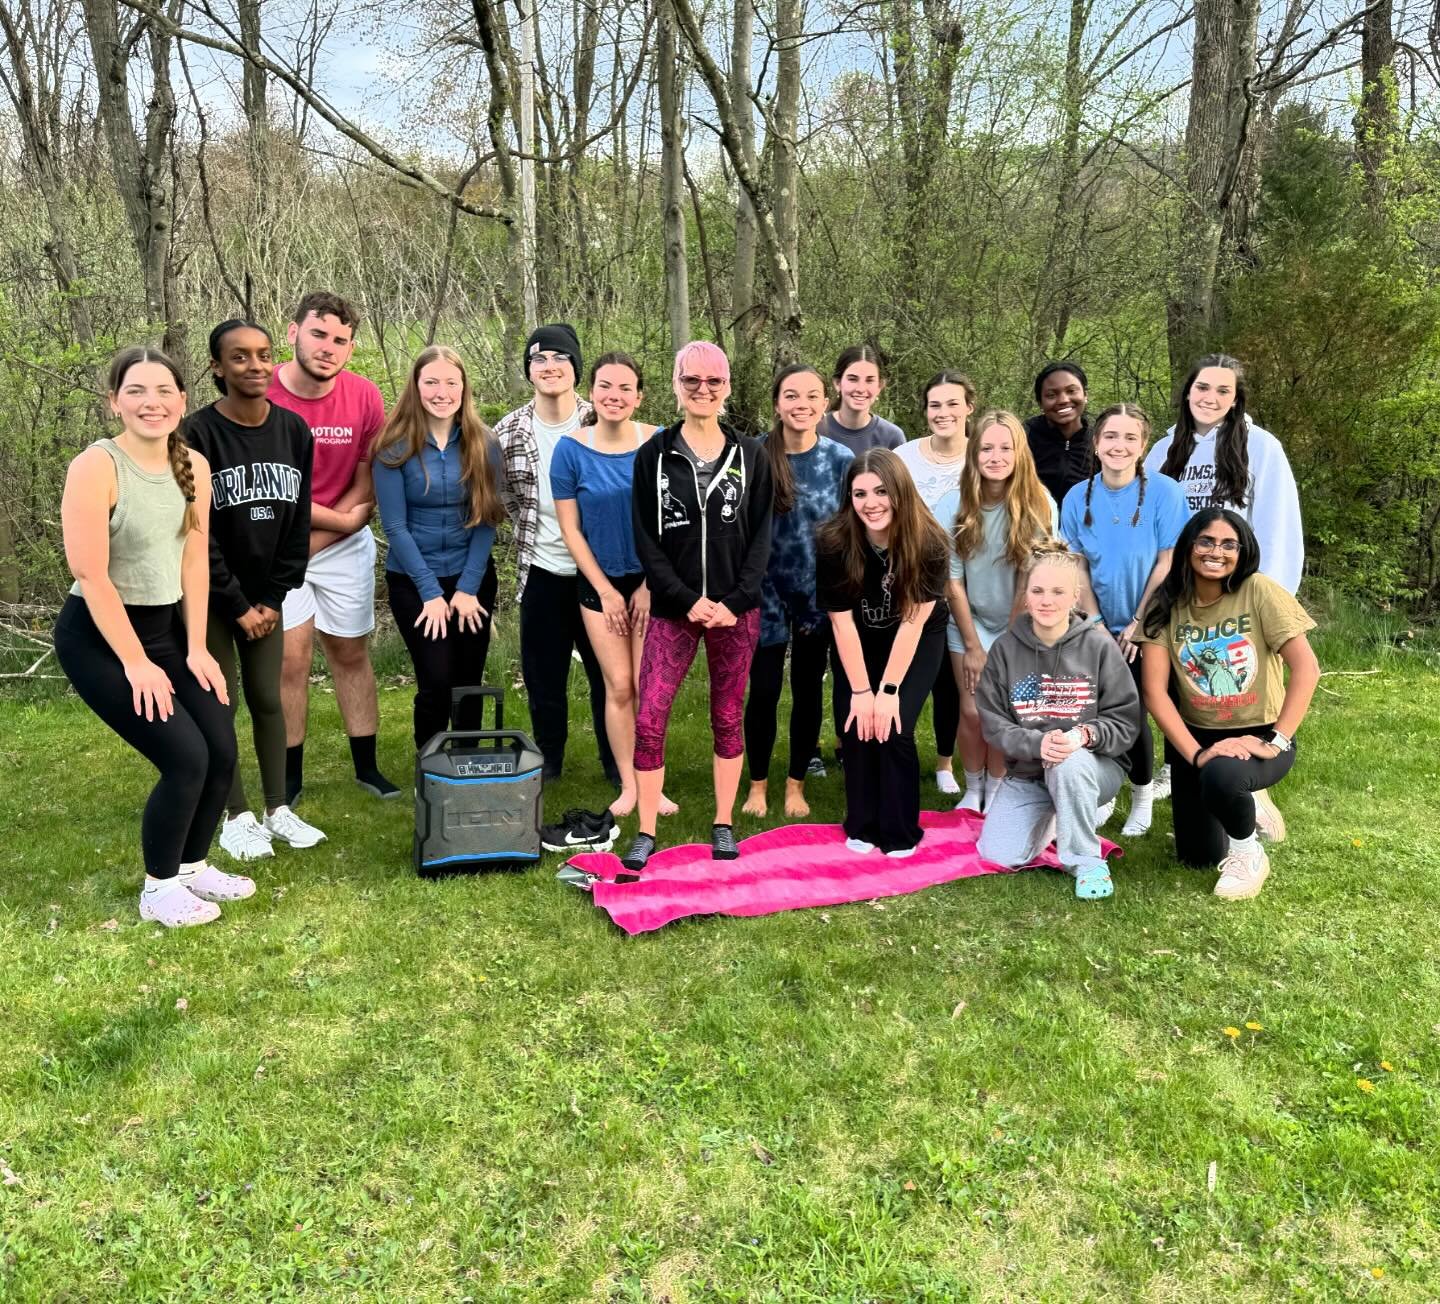 In March, High School peer leaders monthly lesson was on mindfulness, self-care and meditation. Today, in collaboration with @studiobyoga, they were able to experience a private yoga class by an incredible instructor, Robynn Jenkins 💙💙 Thank you fo